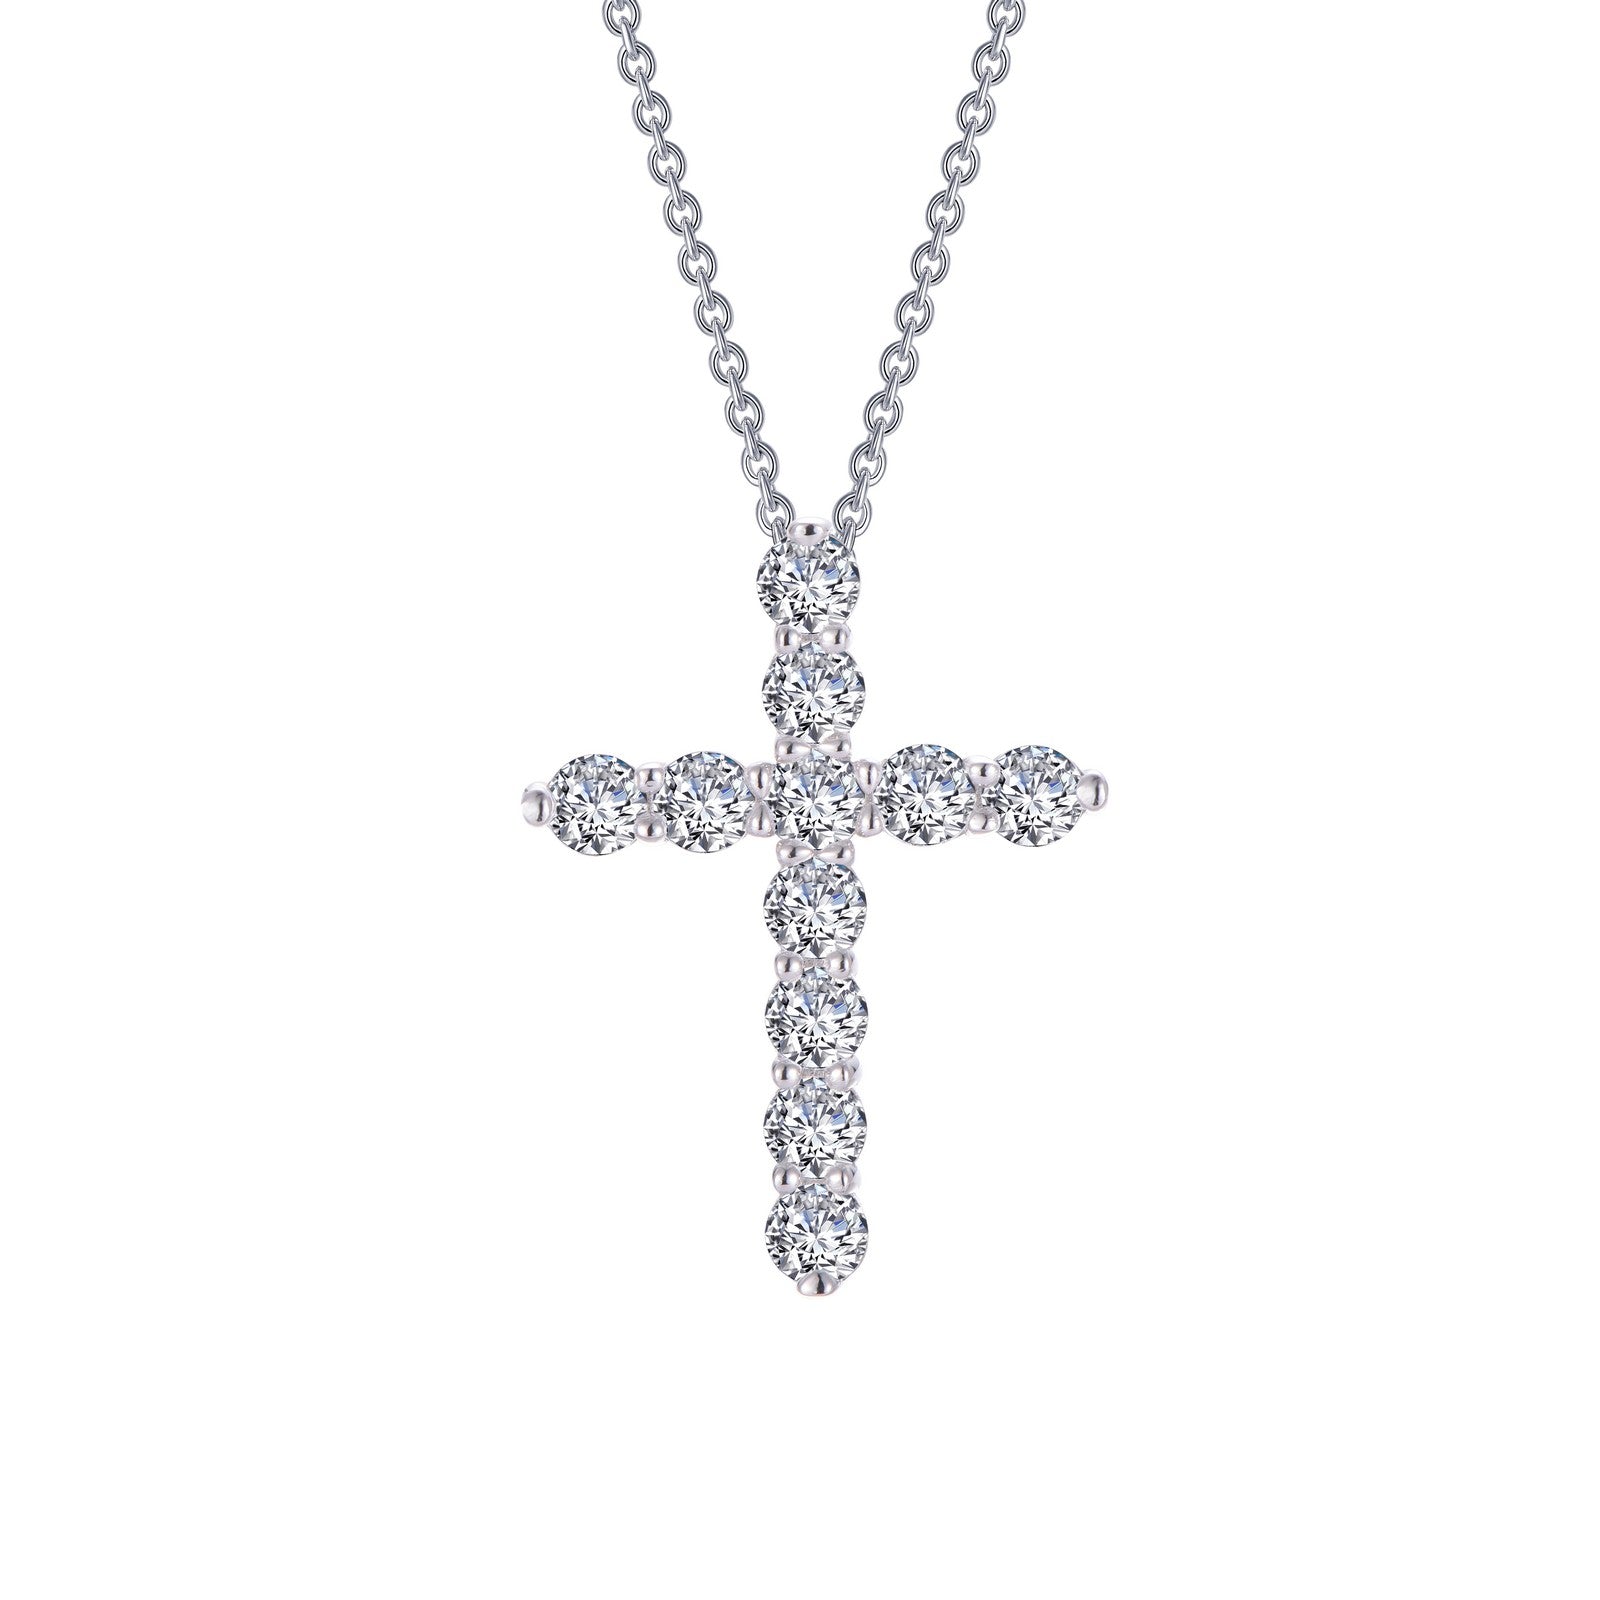 CROSS PENDANT IS SET WITH LAFONN'S SIGNATURE LASSAIRE STONES IN STERLING SILVER BONDED WITH PLATINUM